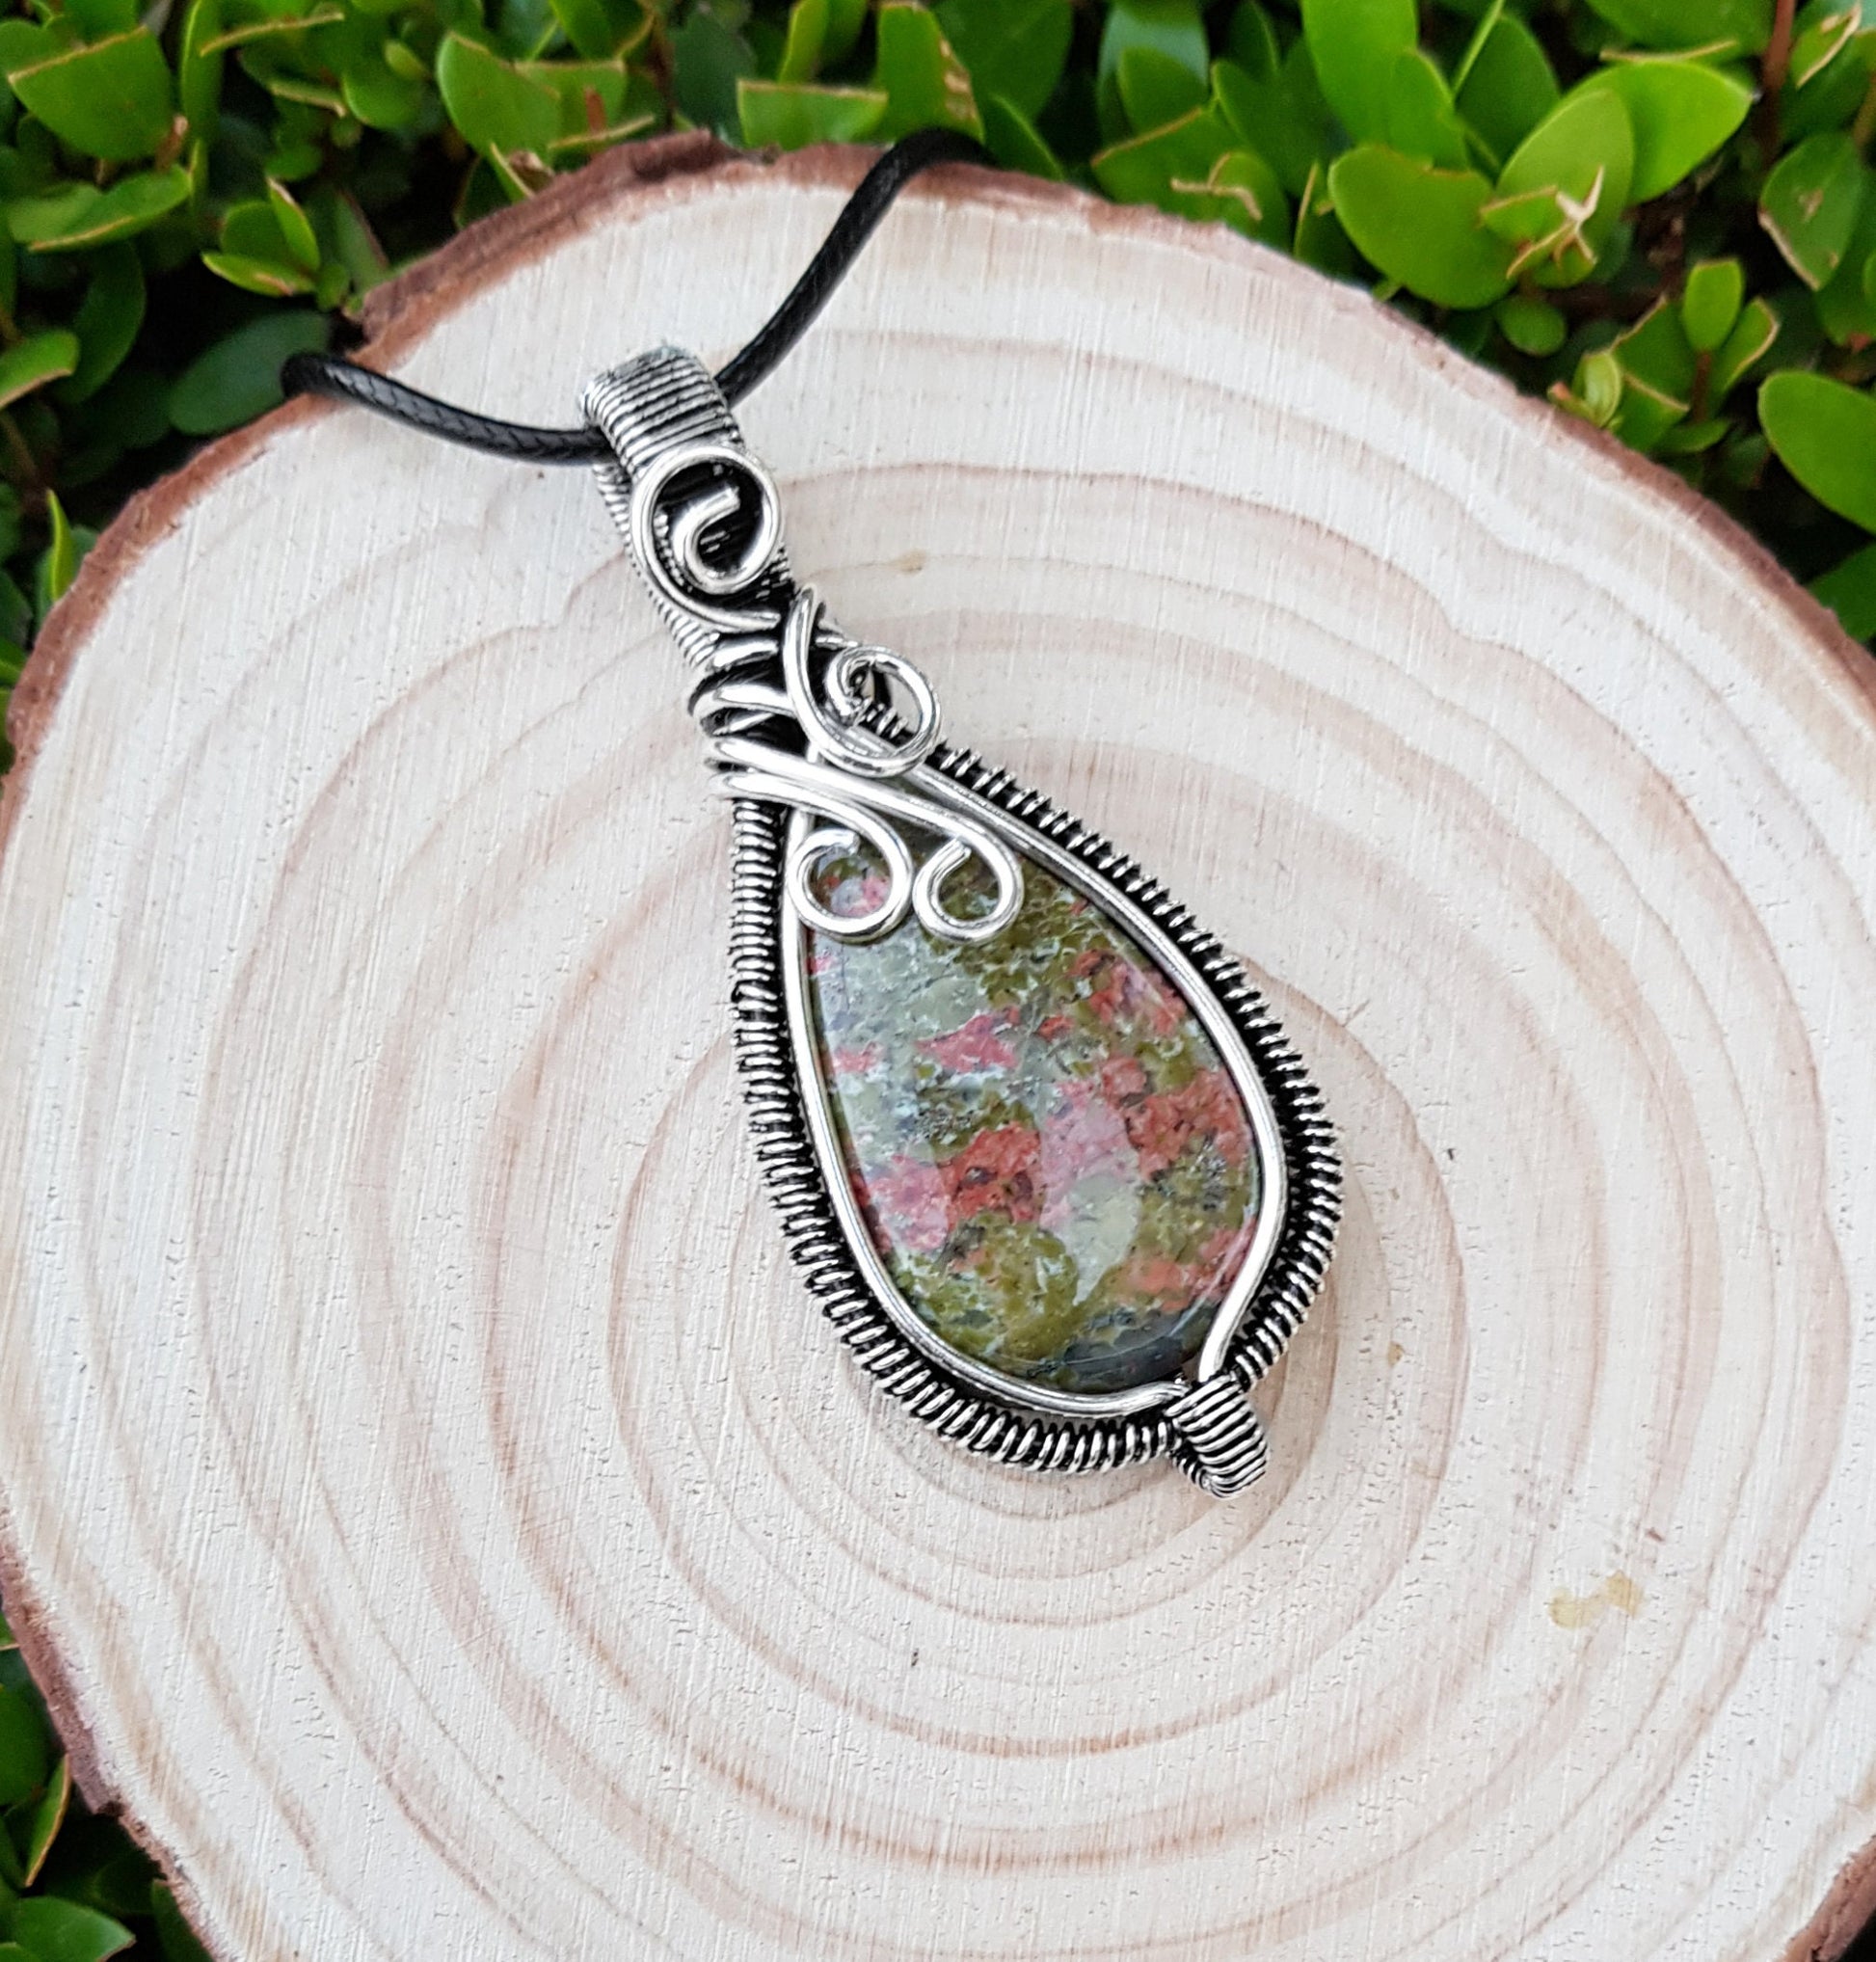 Wire Wrapped Unakite Jasper Necklace In Sterling Silver Statement Pendant Boho Necklace One Of A Kind Gift Handmade Jewelry